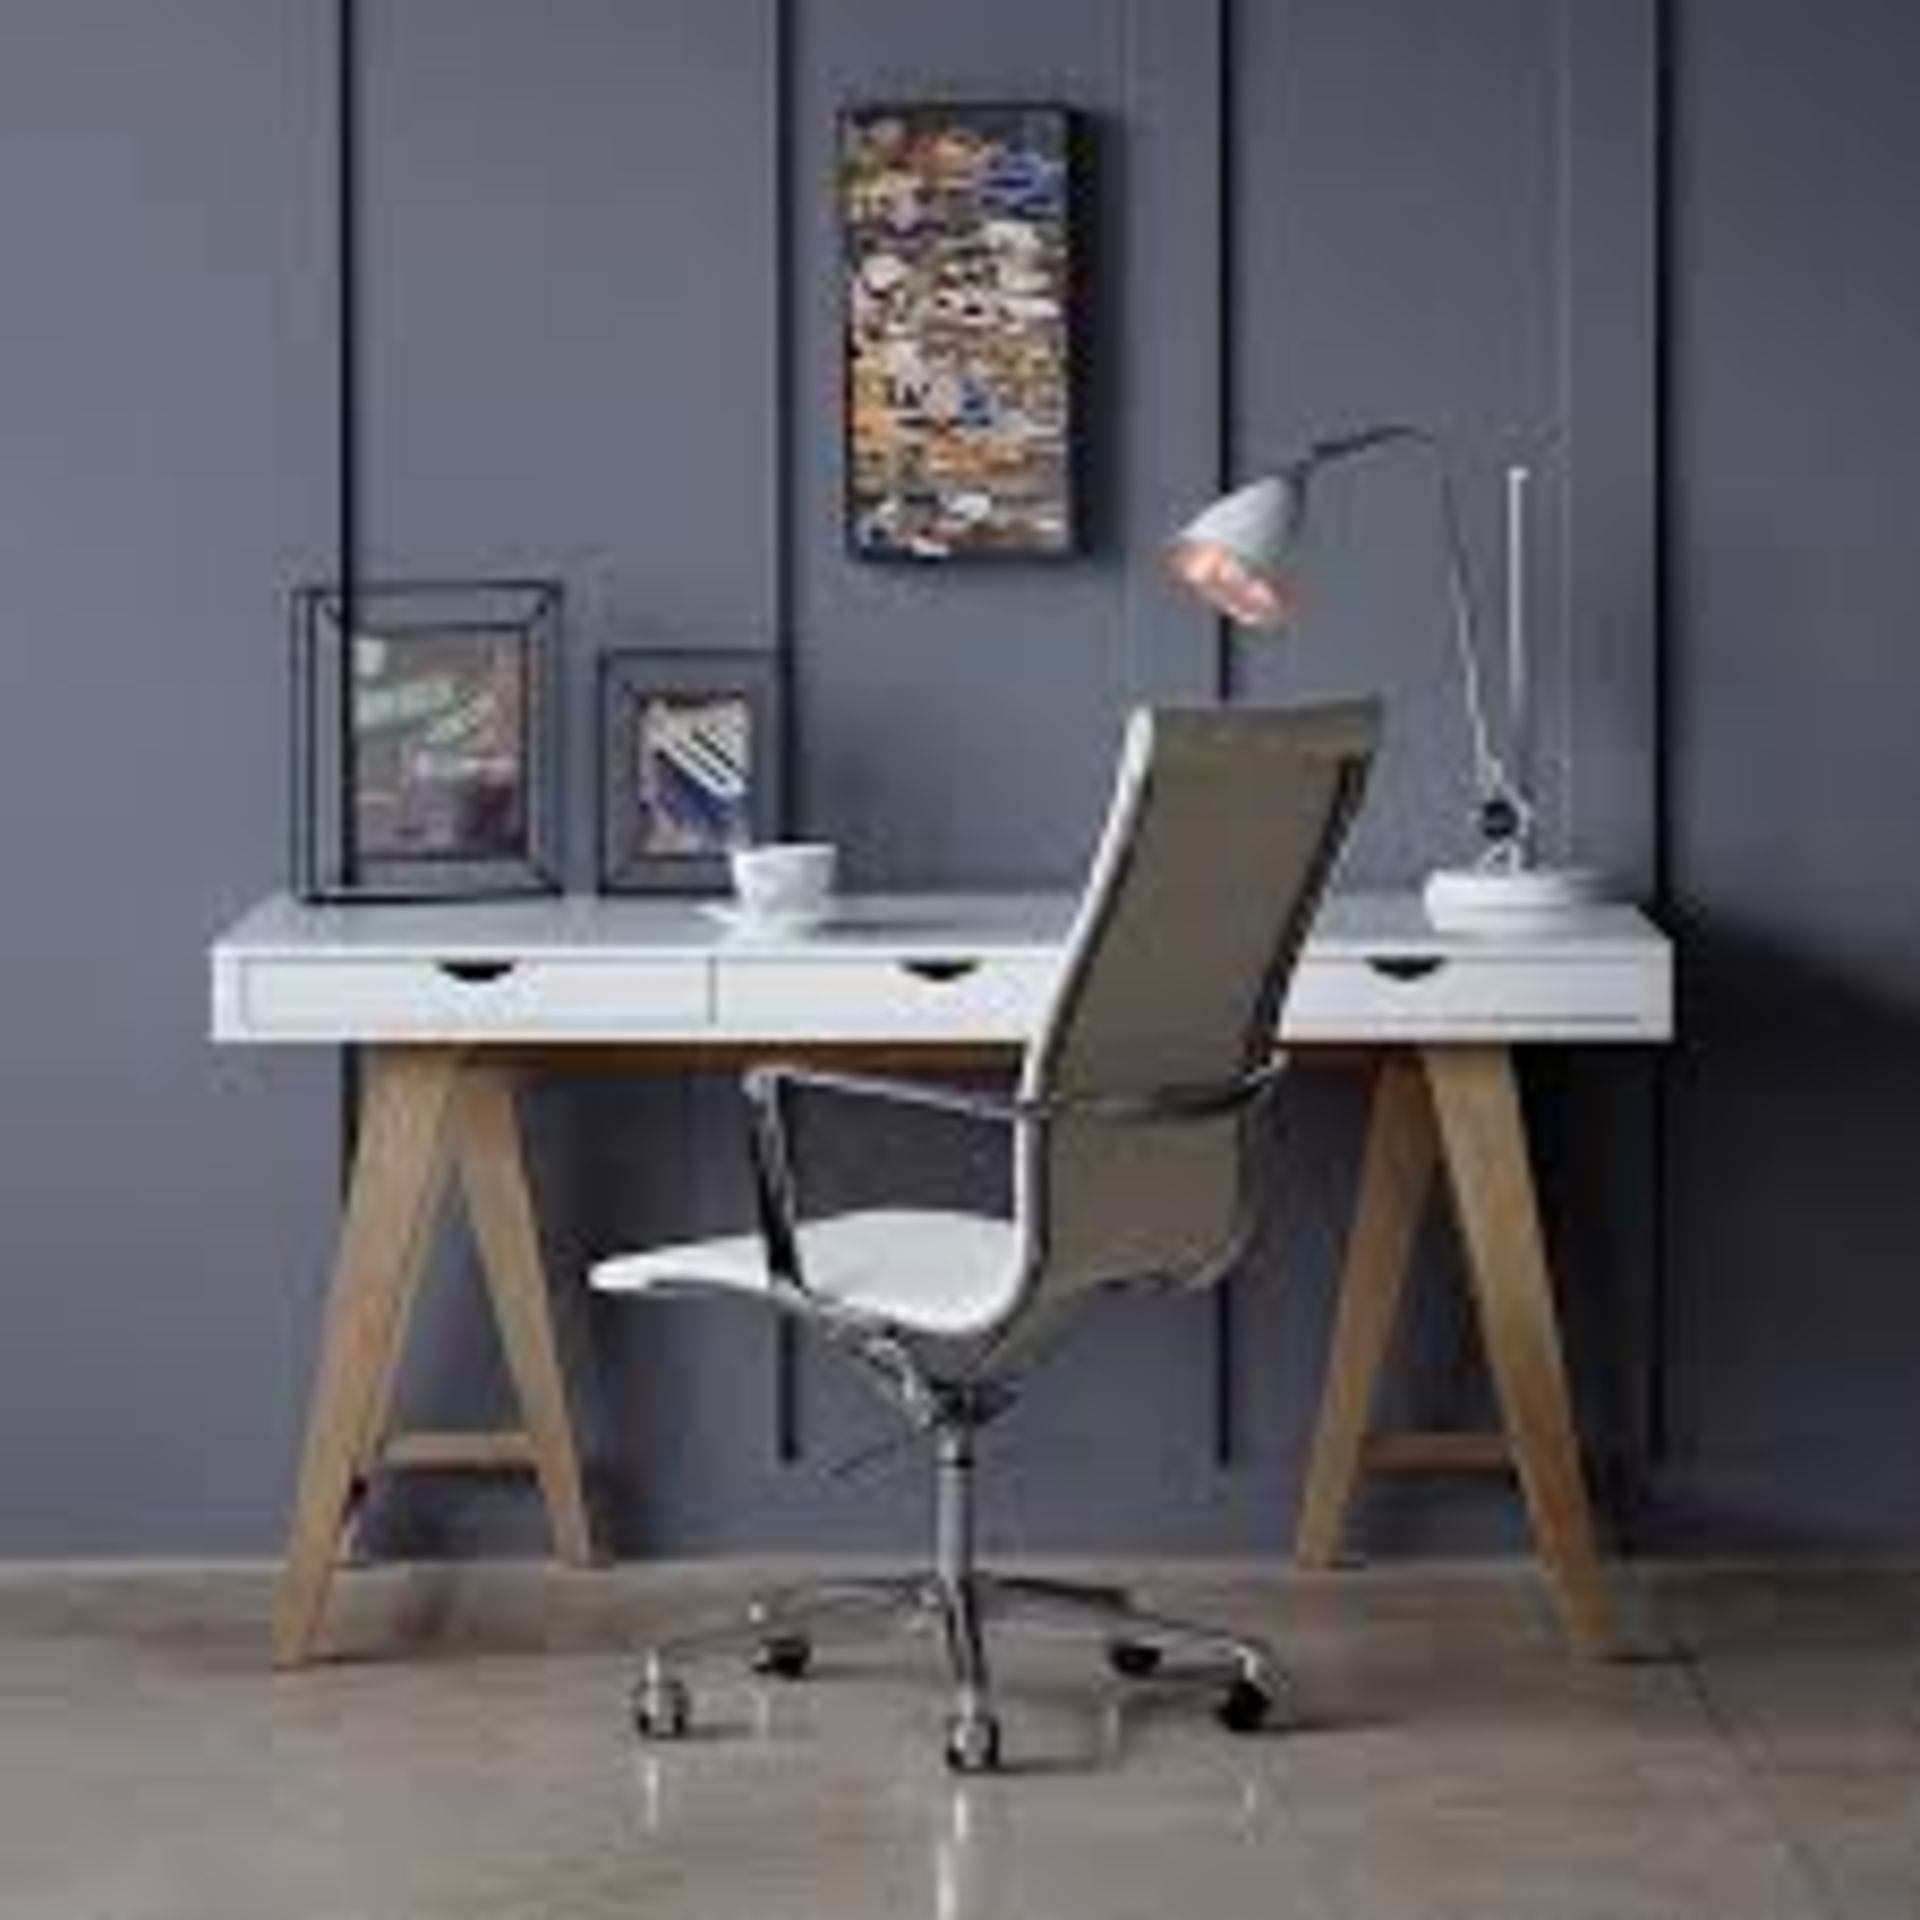 4 x Blue Suntree Ellwood Trestle Office Desks in White With Wooden Legs - Unchecked Customer Returns - Image 2 of 4